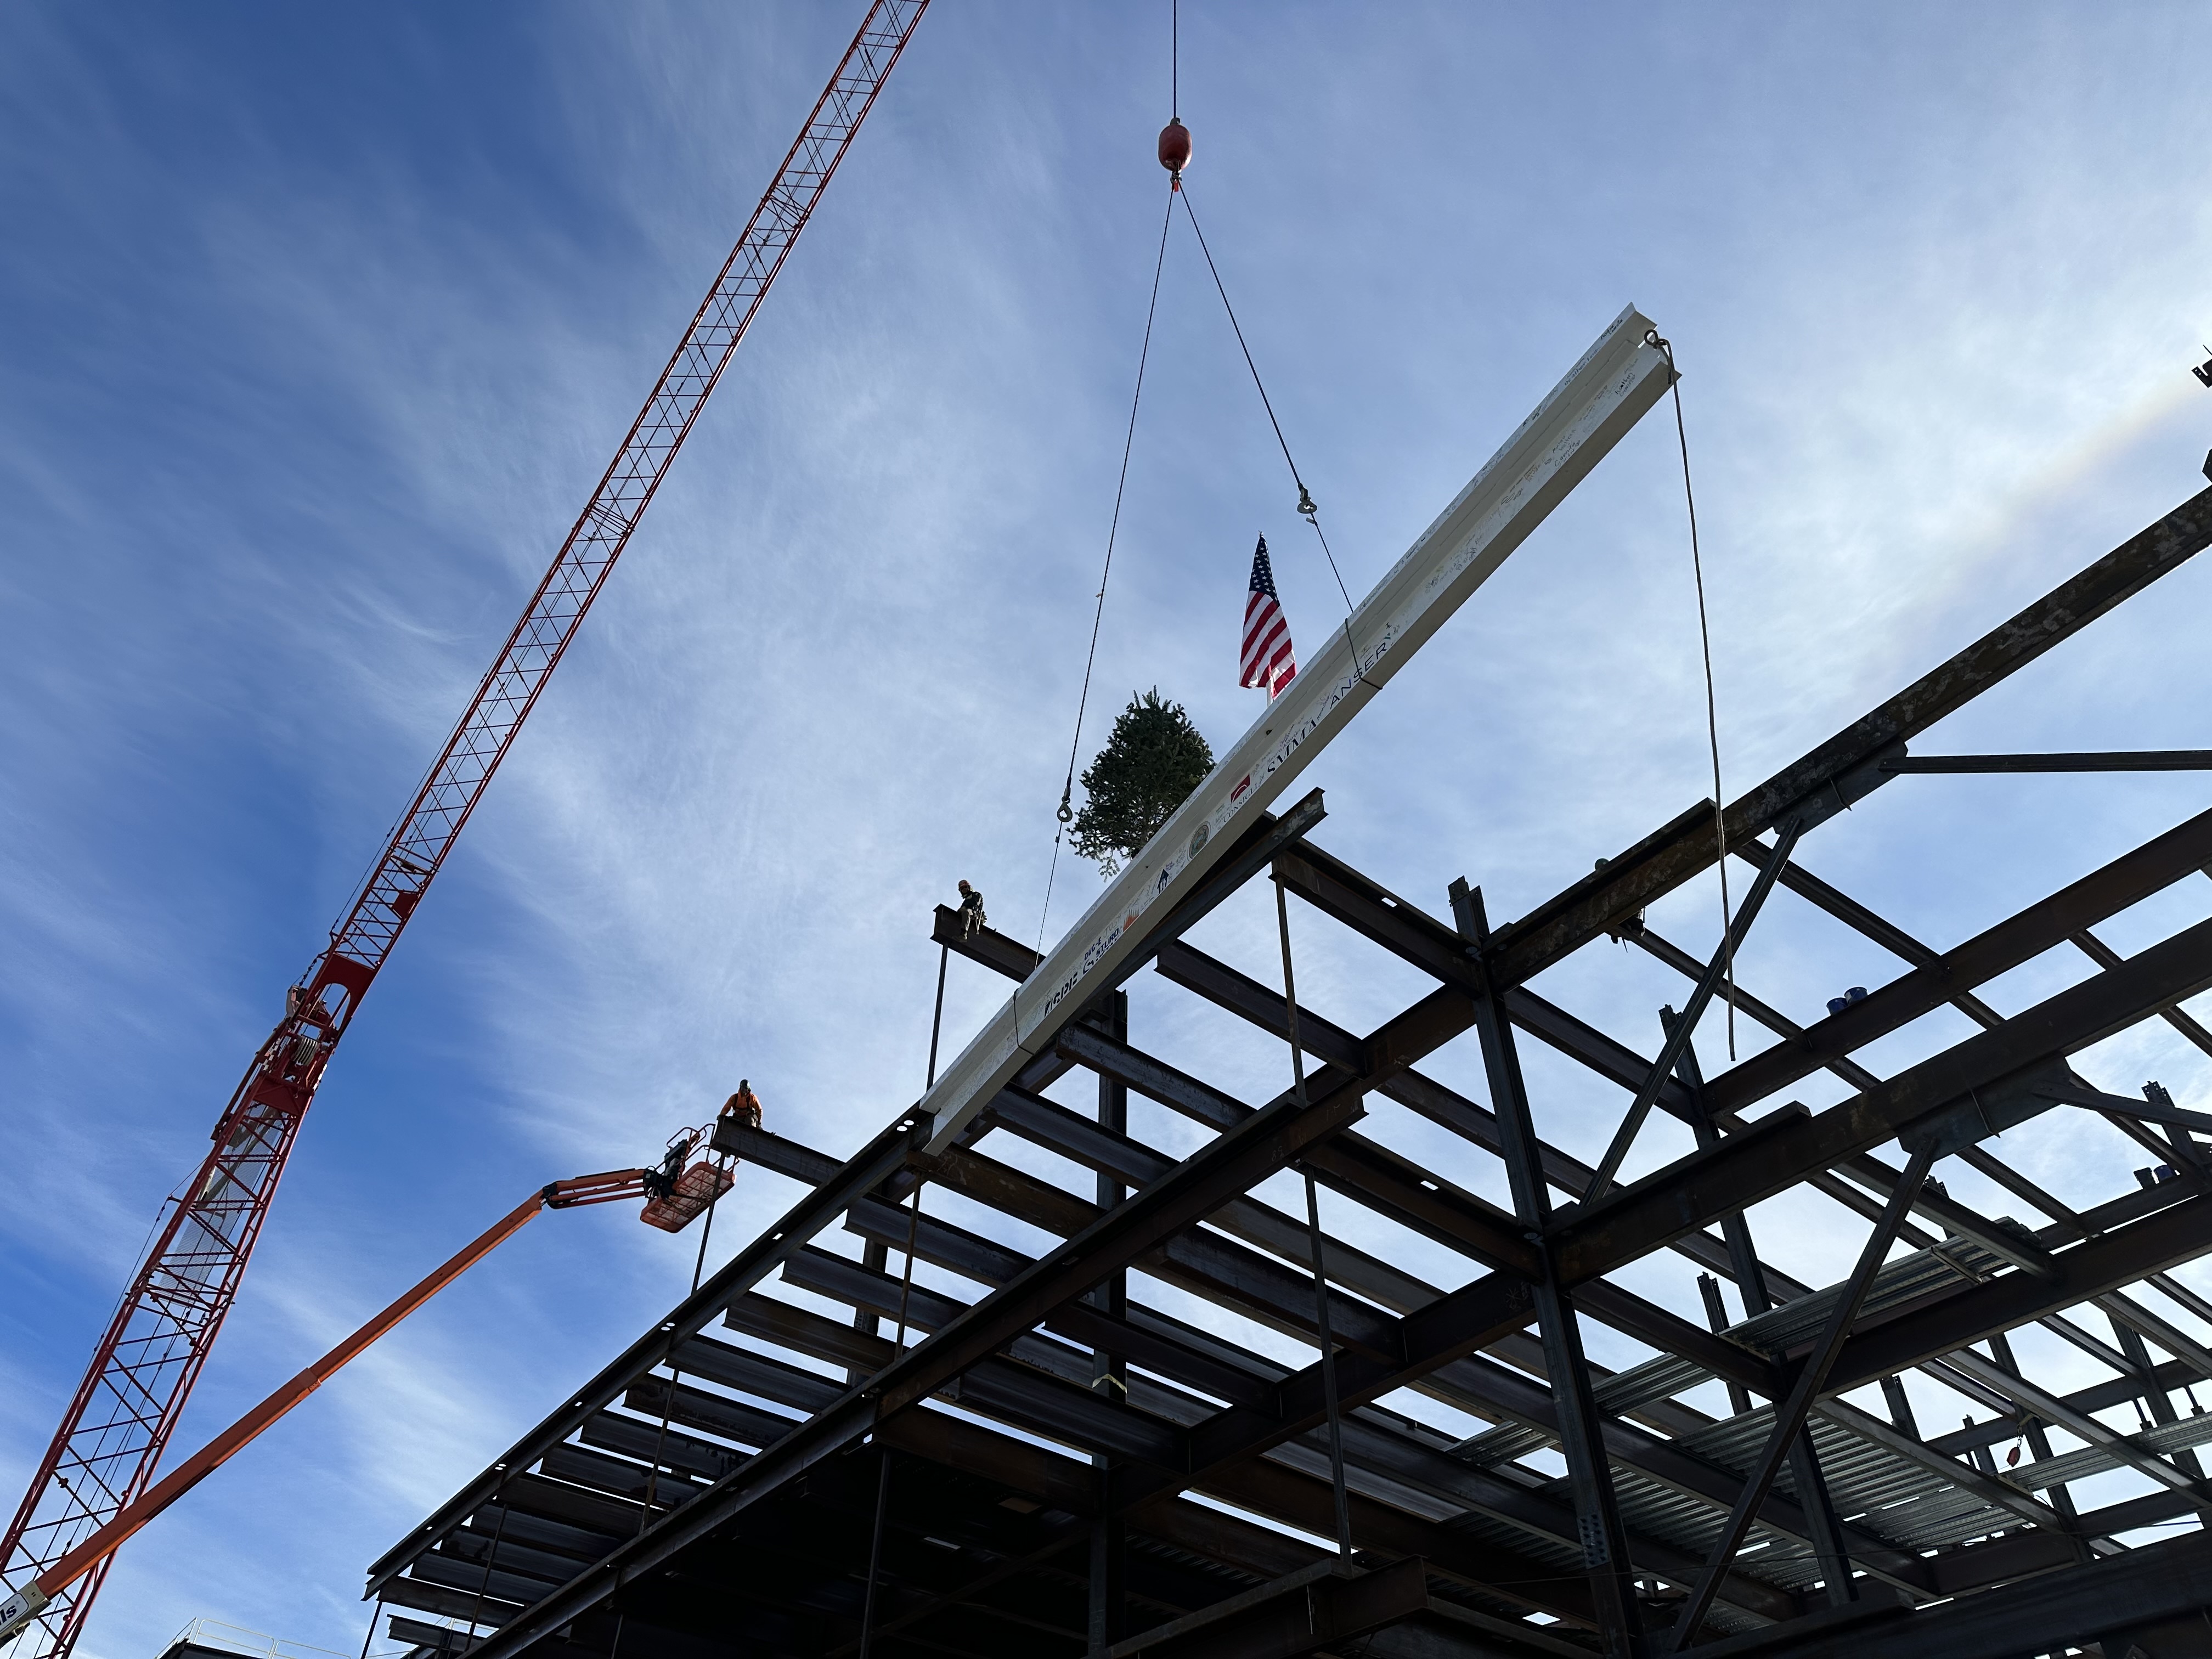 lowering the topping steel beam from a crane